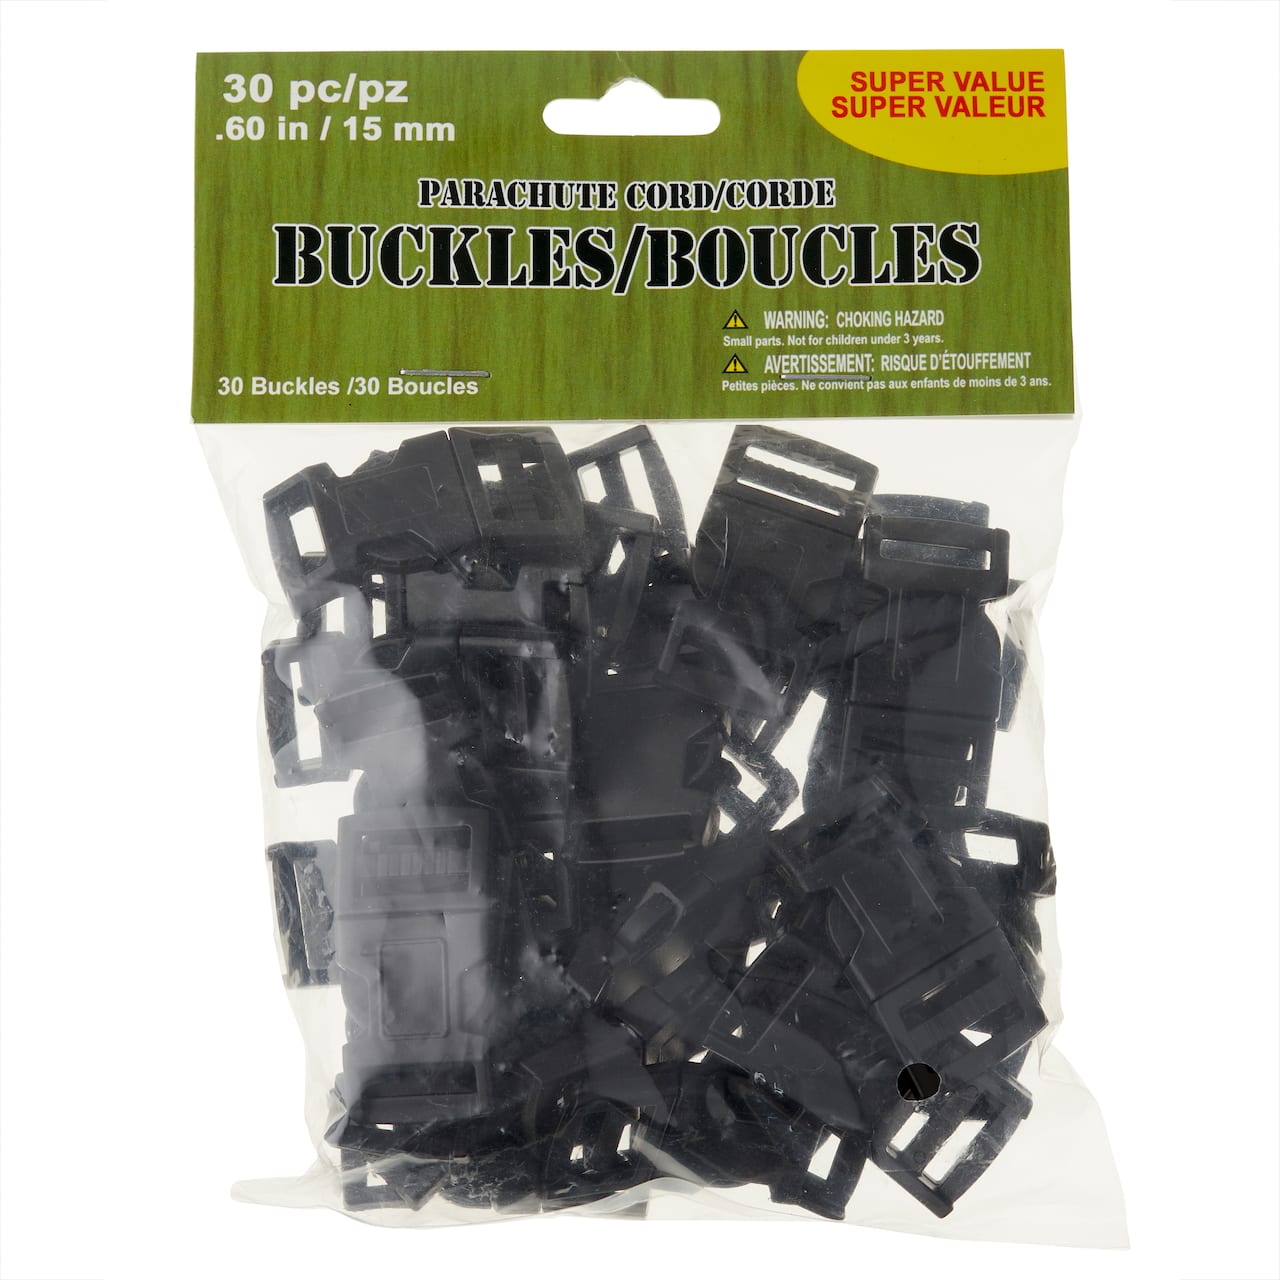 Parachute Cord Buckles, 15mm, Value Pack